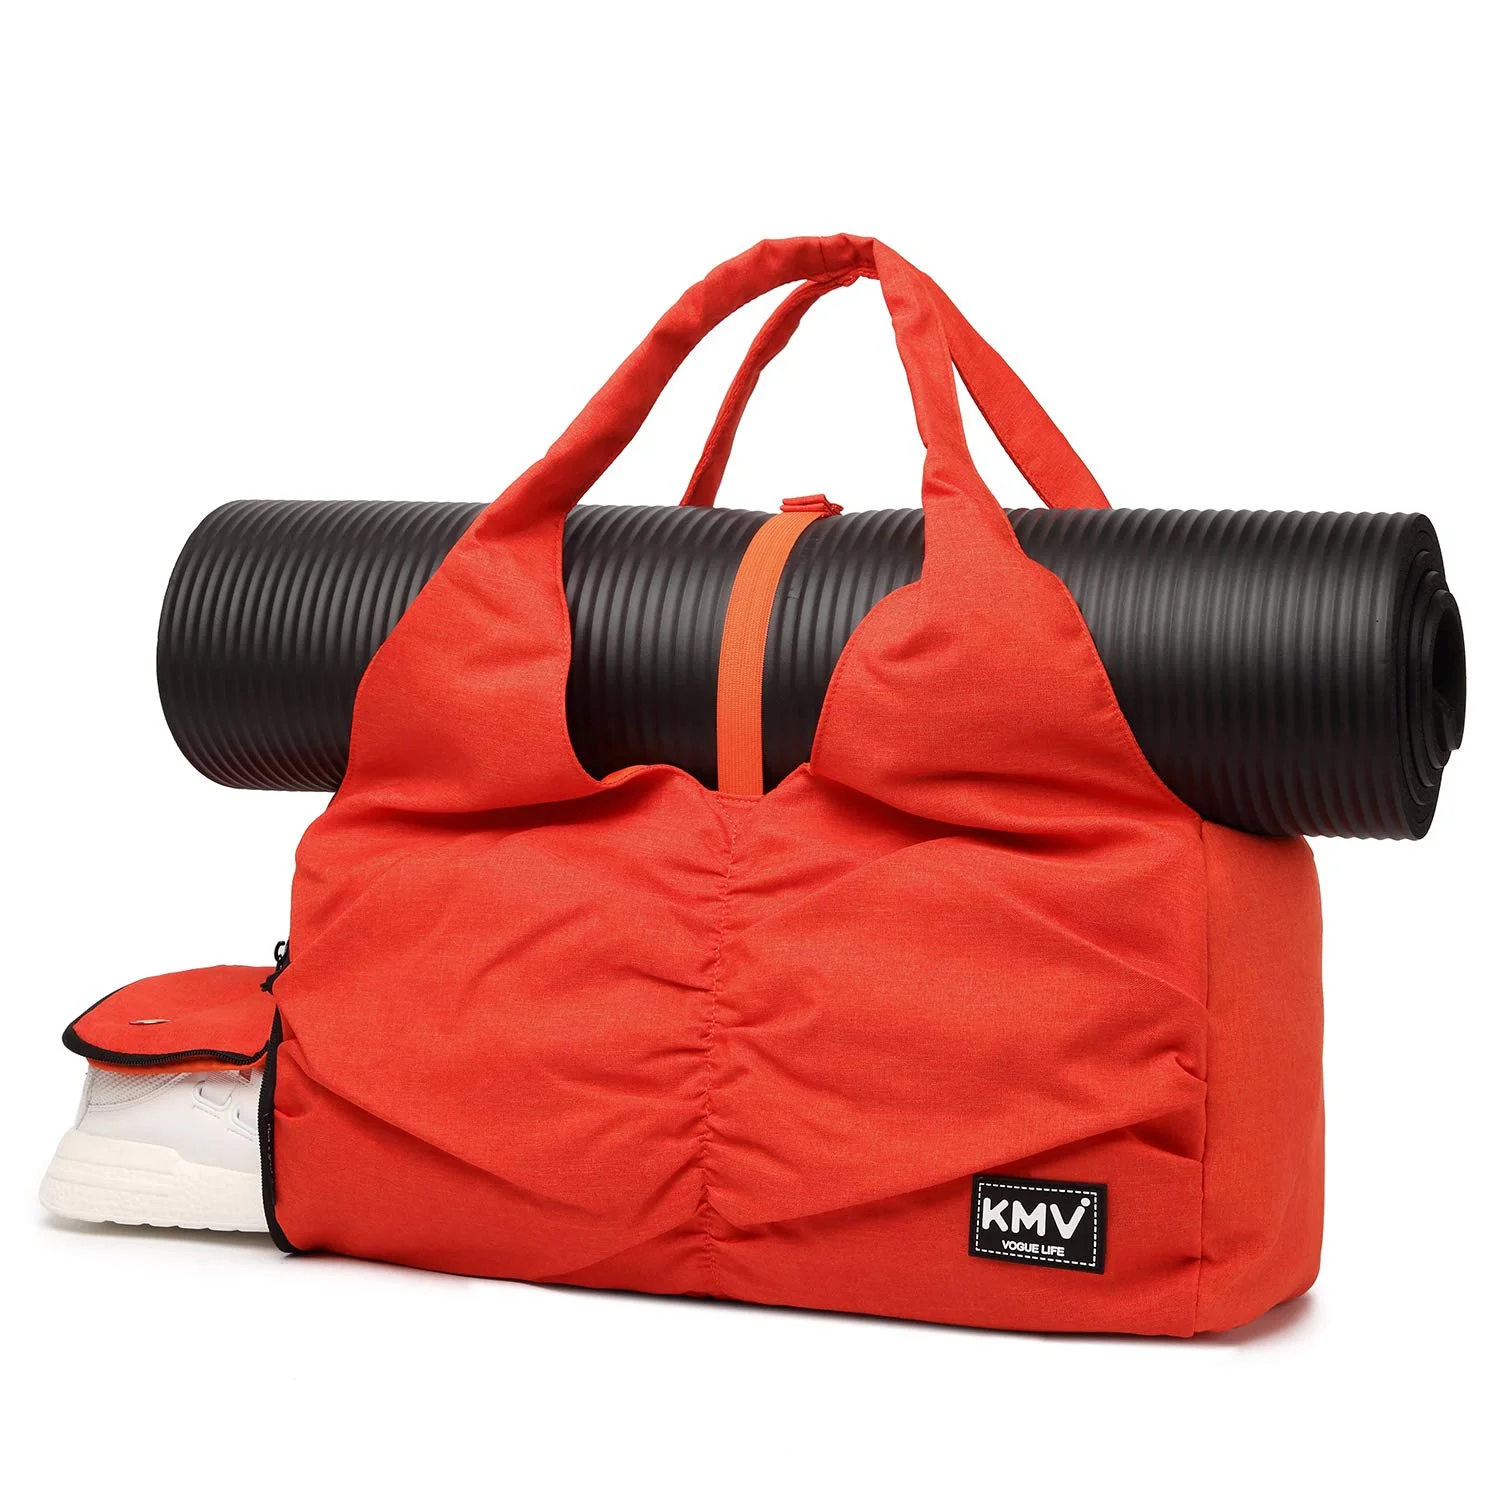 Travel Yoga Gym Bag for Women, Carrying Workout Gear, Makeup, and